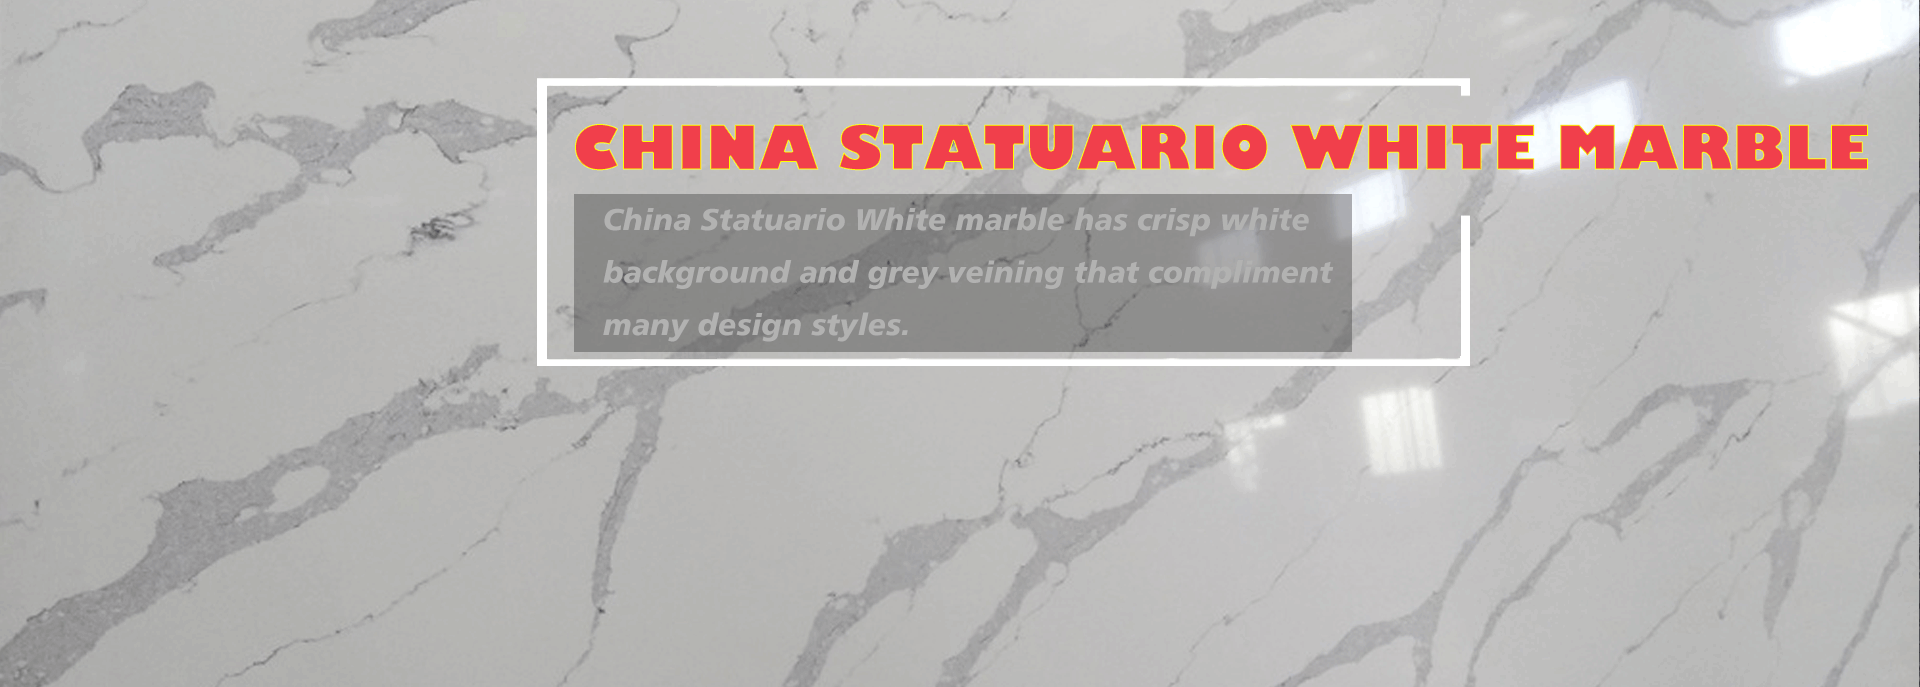 Oriental White marble 6"x3" polished wall tiles